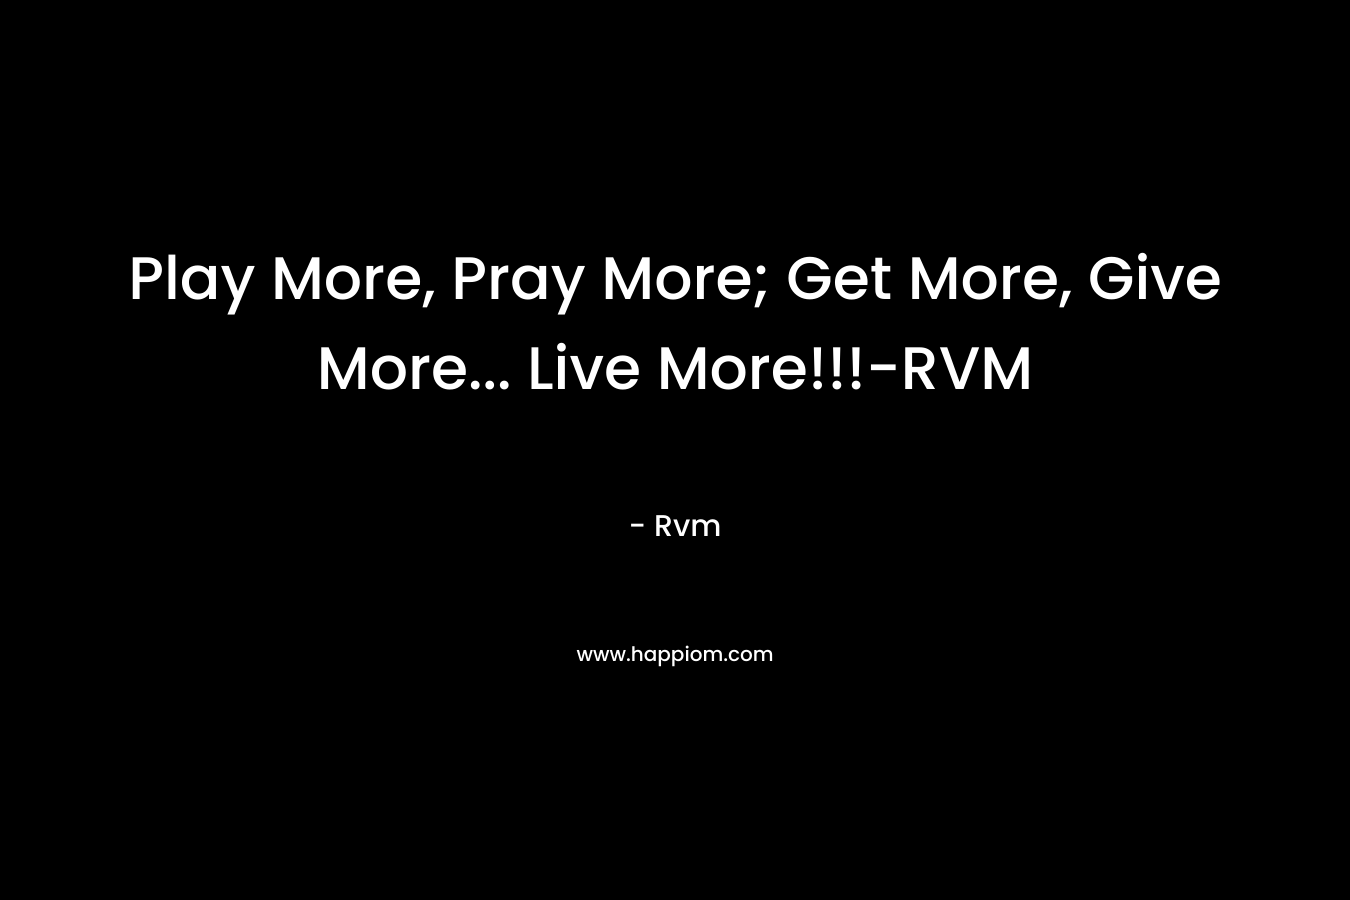 Play More, Pray More; Get More, Give More... Live More!!!-RVM